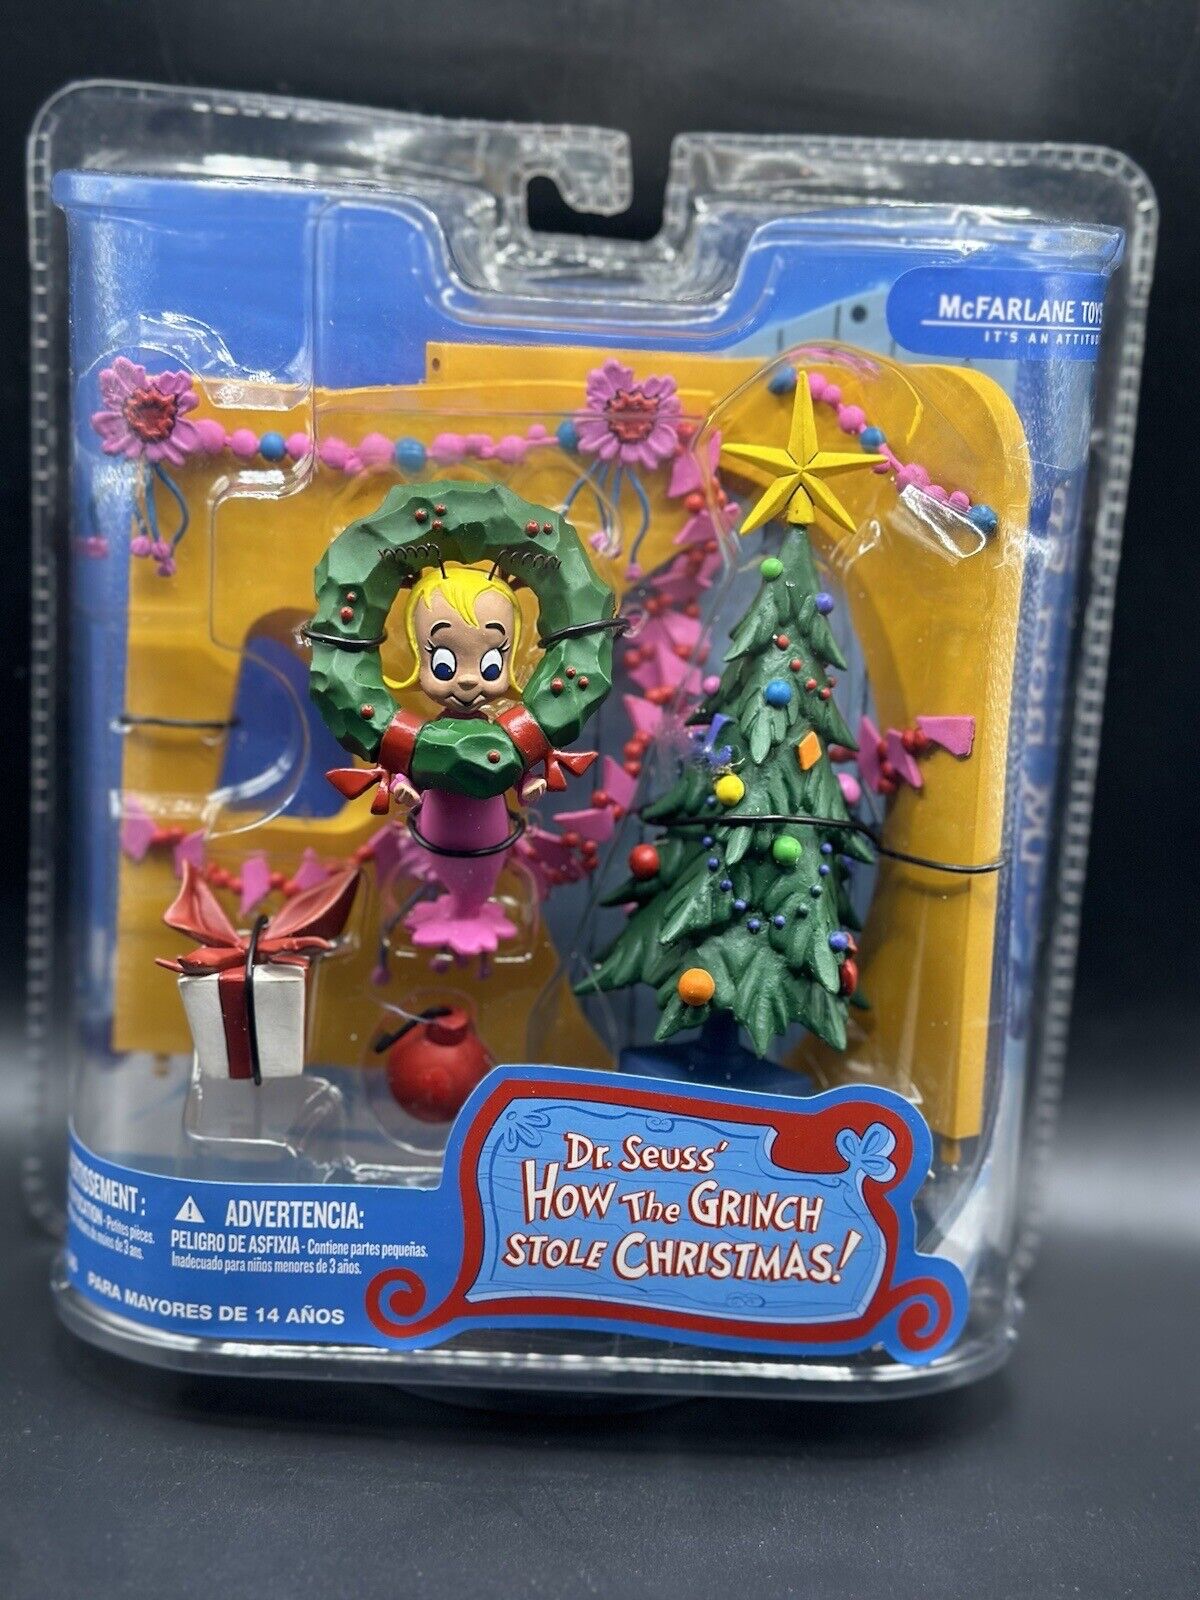 NEW SEALED McFarlane Toys Dr. Seuss How The Grinch Stole Christmas CINDY LOU WHO